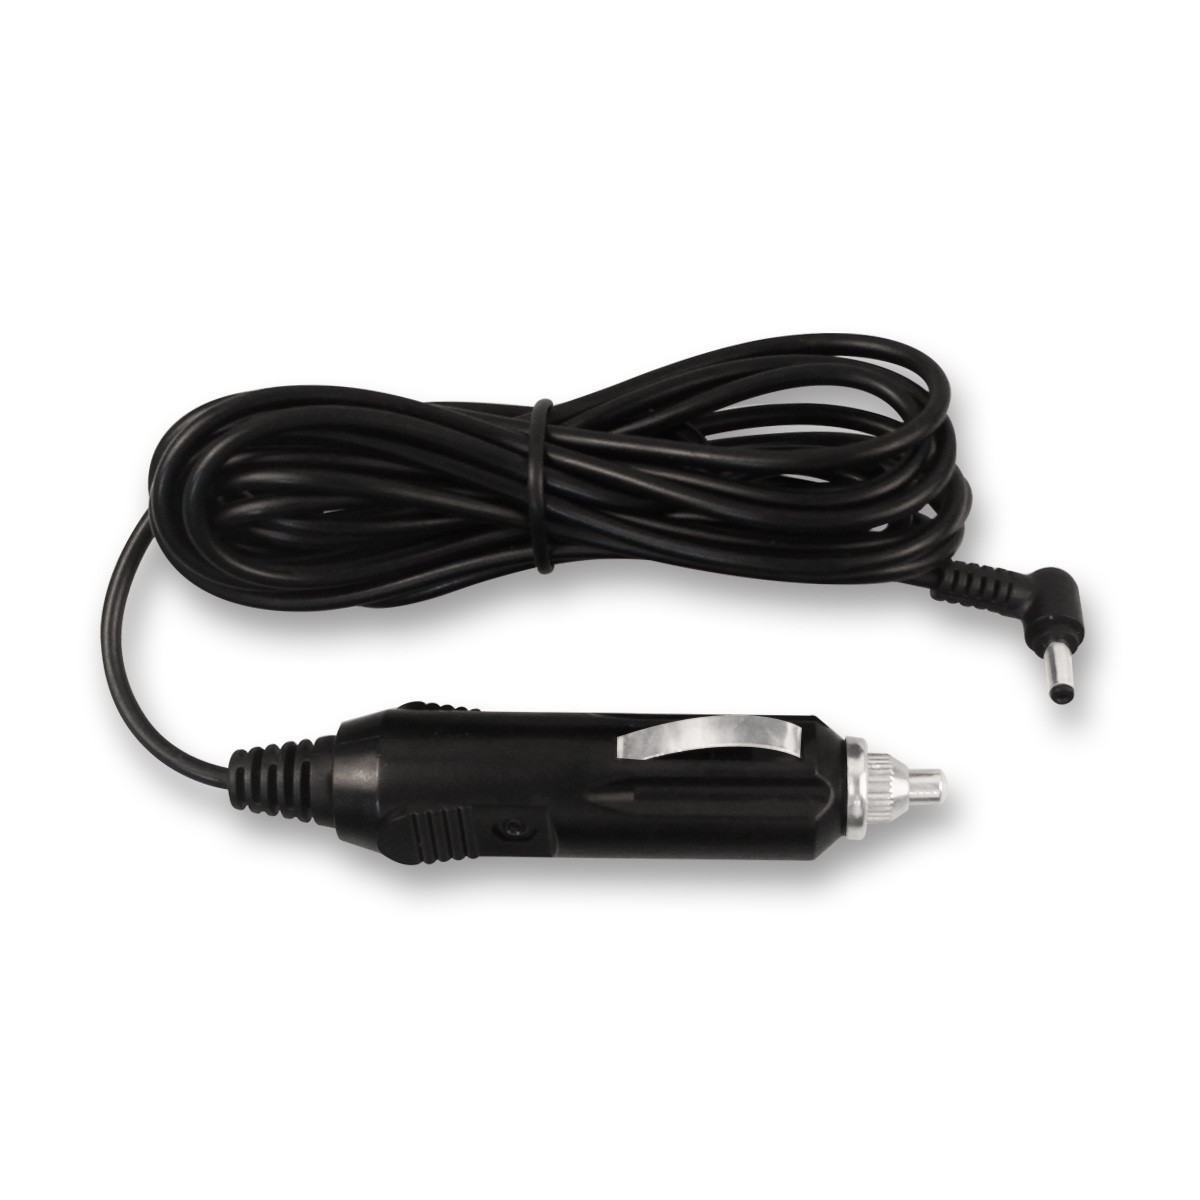 Cigar cable,Cigar cable with charging cables car charger cable to cigarette lighter